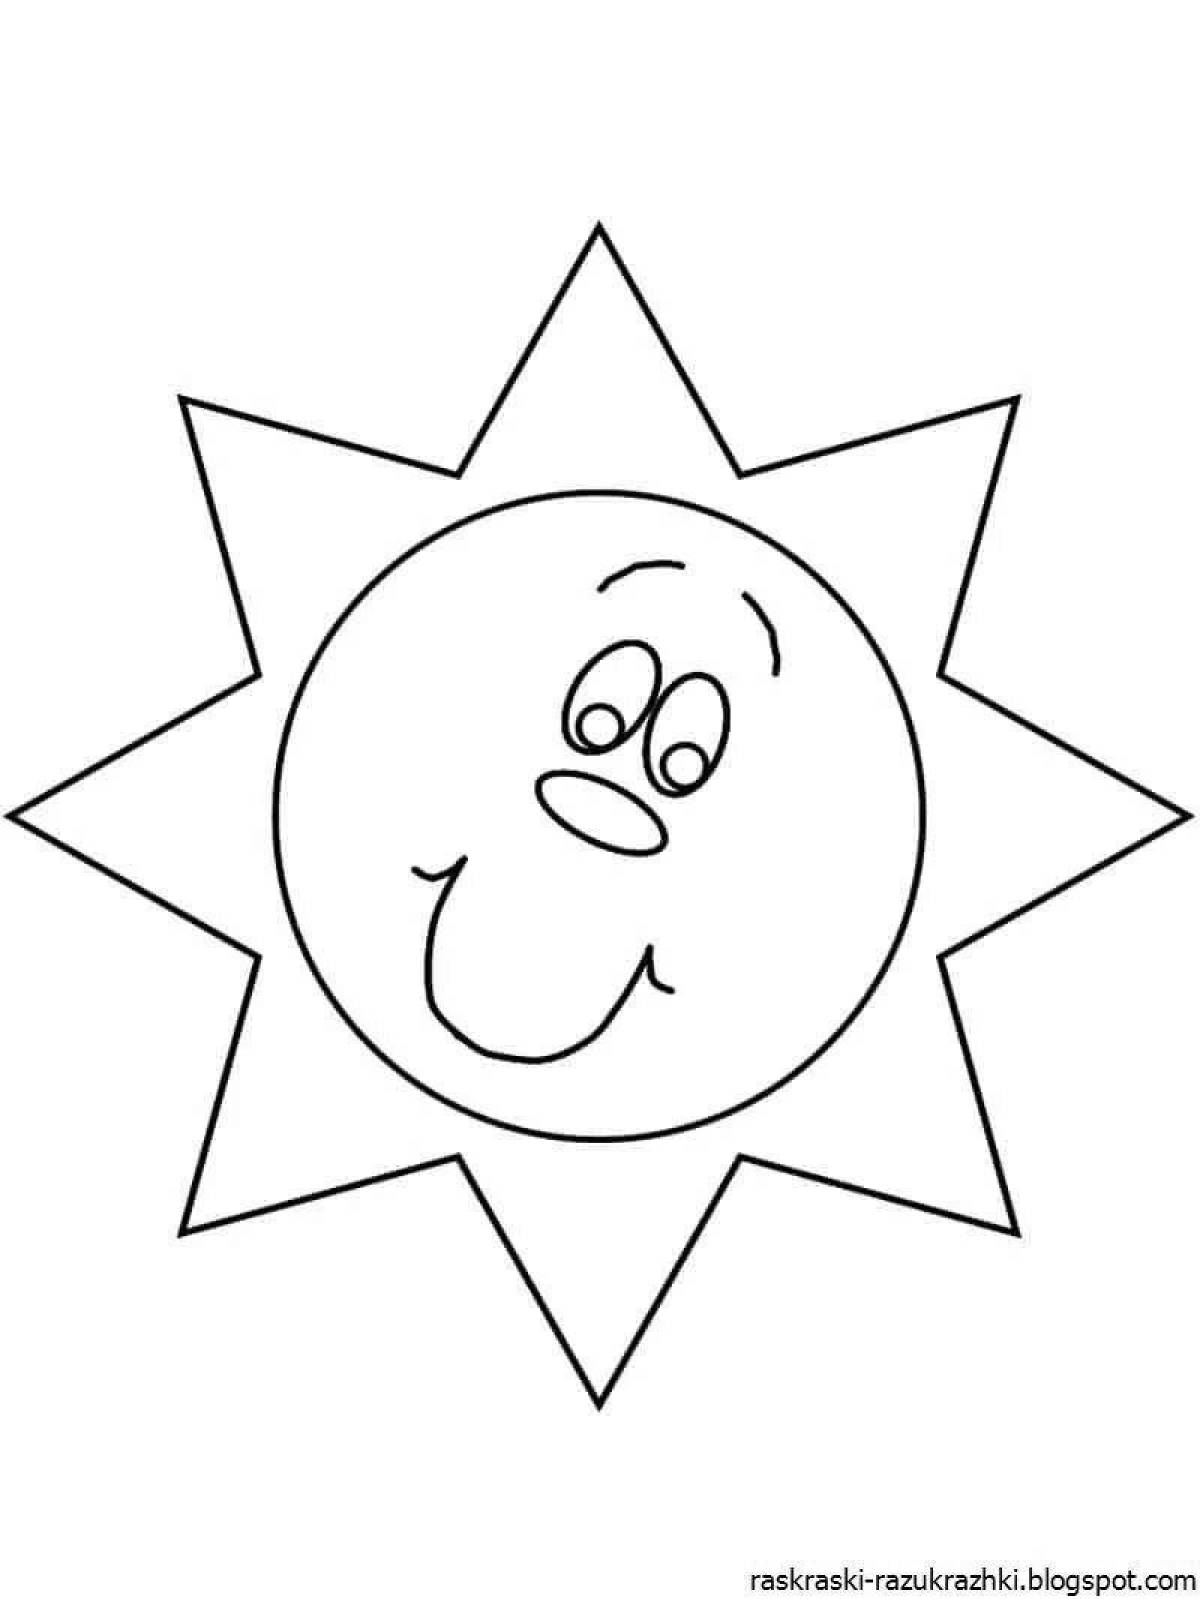 Animated sun coloring page